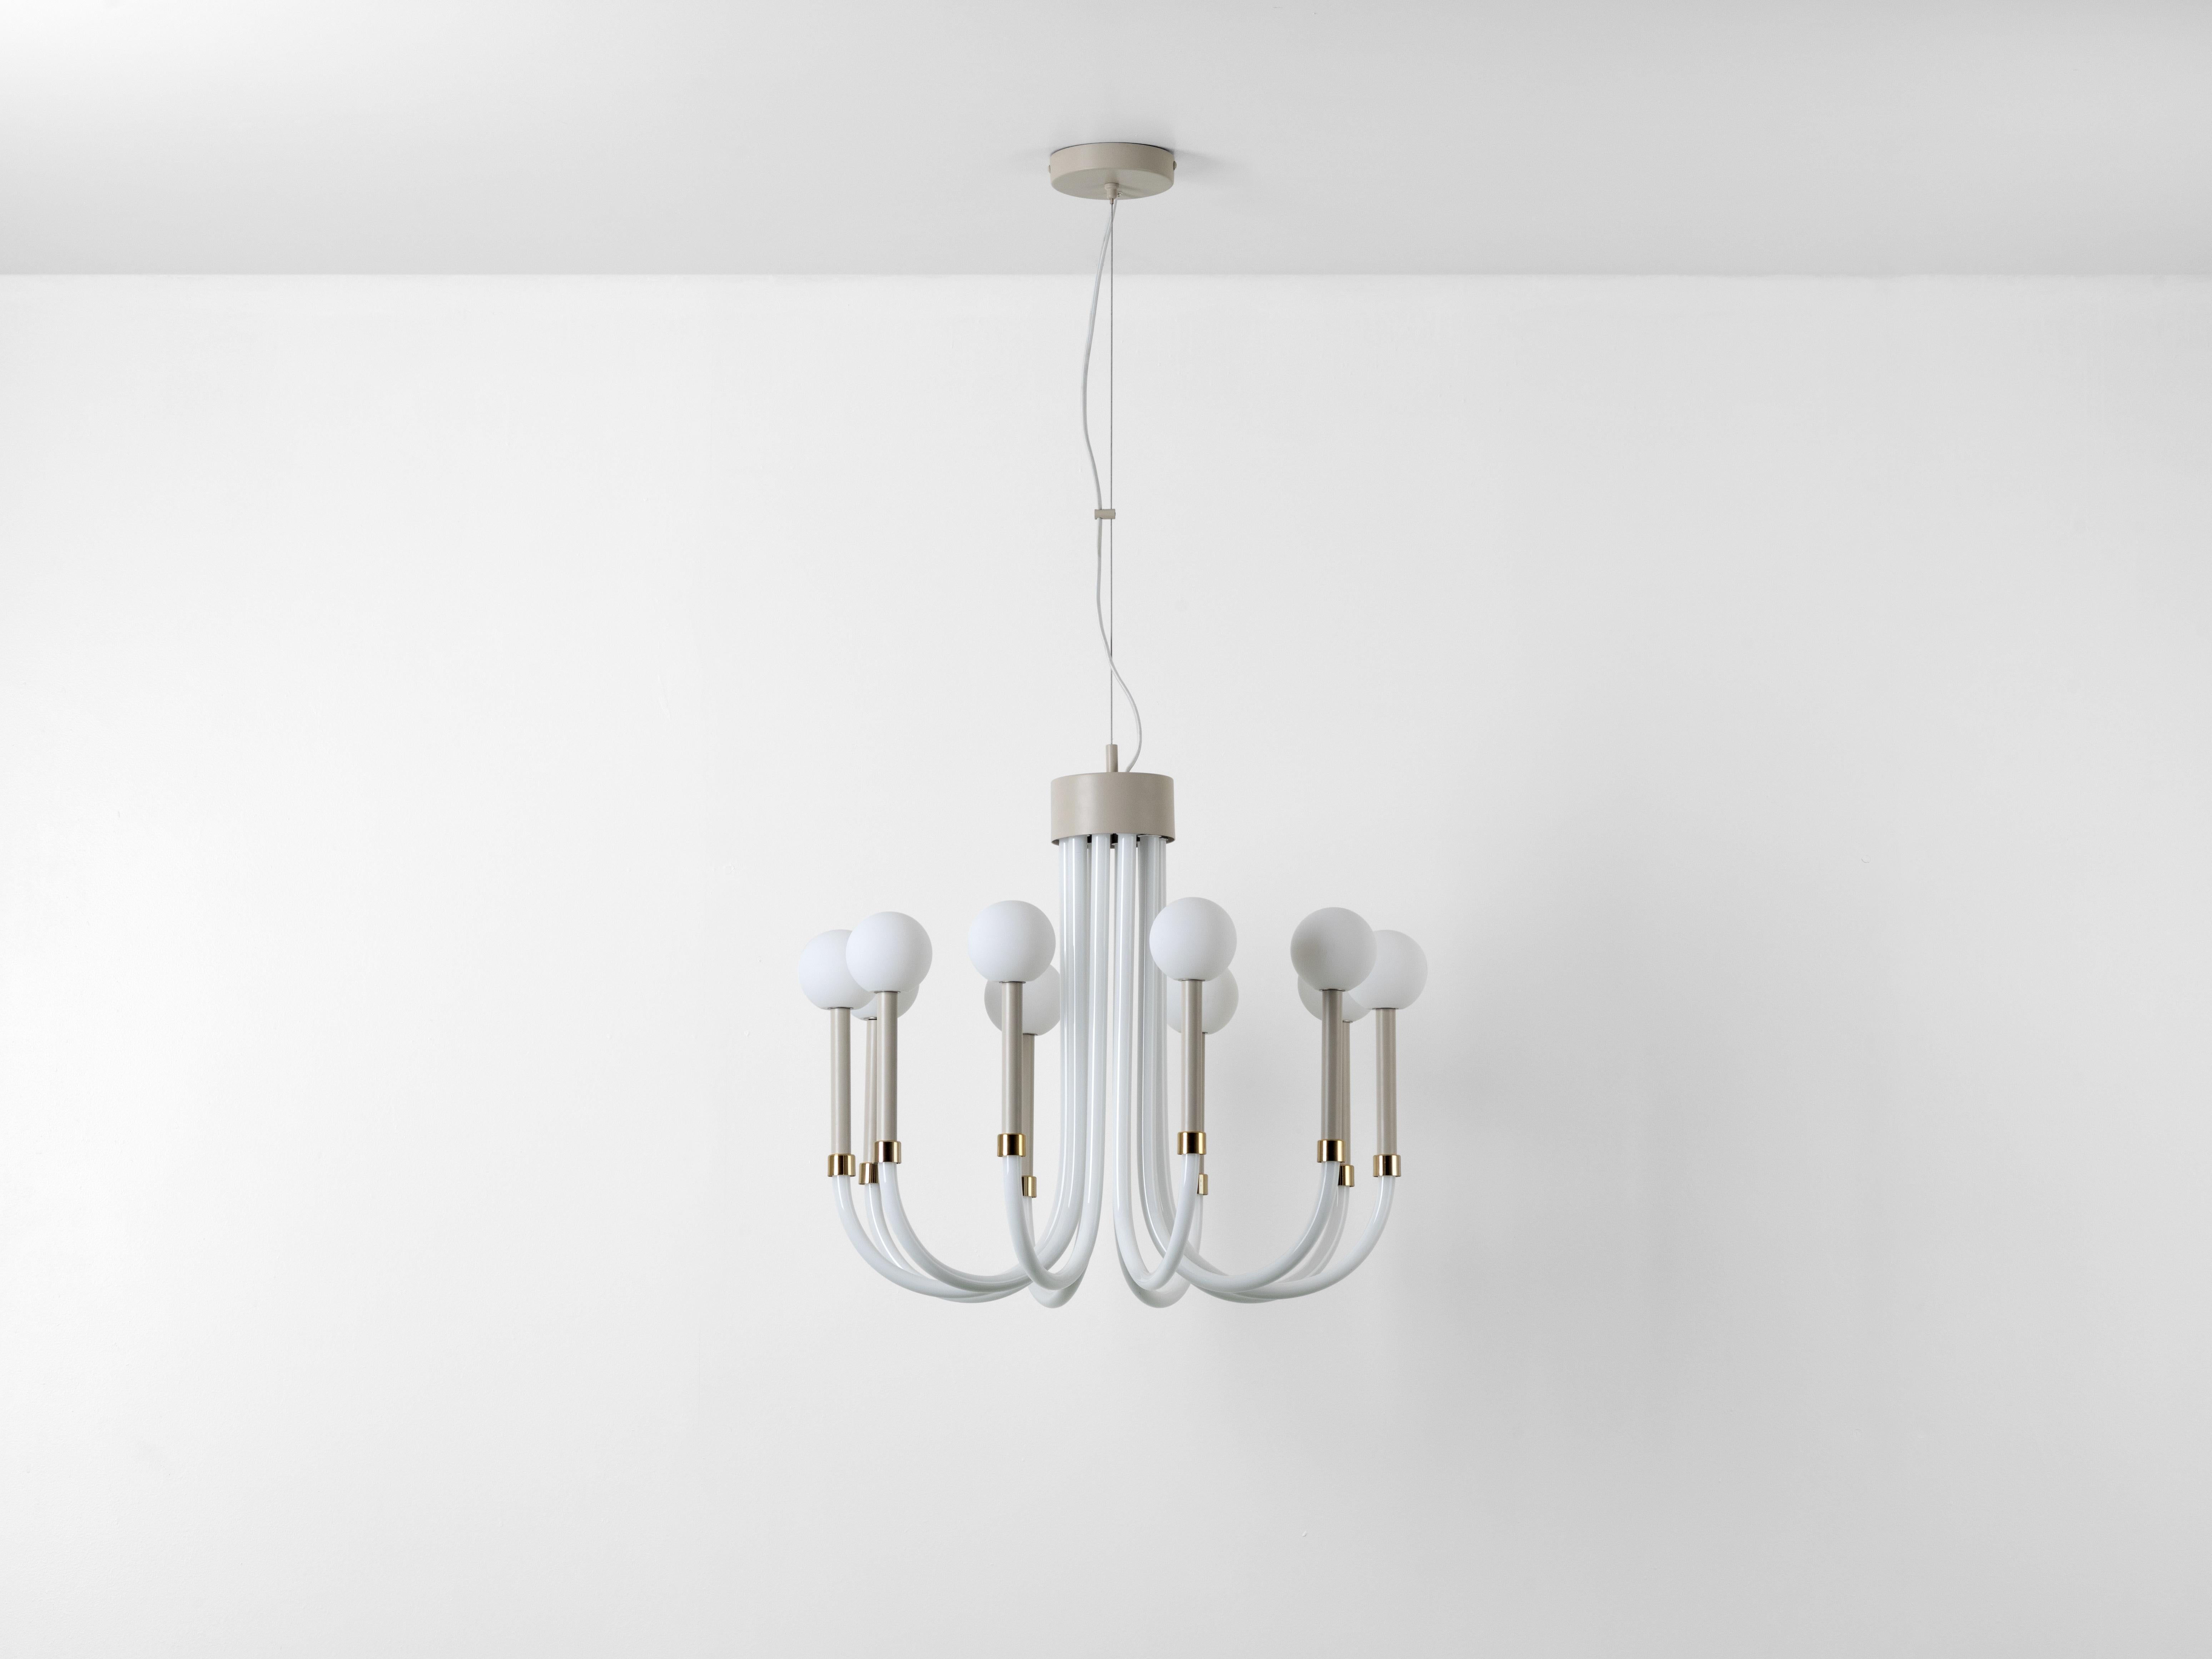 Illuminate your space with the opal ball chandelier. 10 opal glass orbs sit on beautifully curved metal arms, combining classic ideas with a contemporary twist. The result is a modern, sculptural and graphic take on a chandelier, with neutral tones